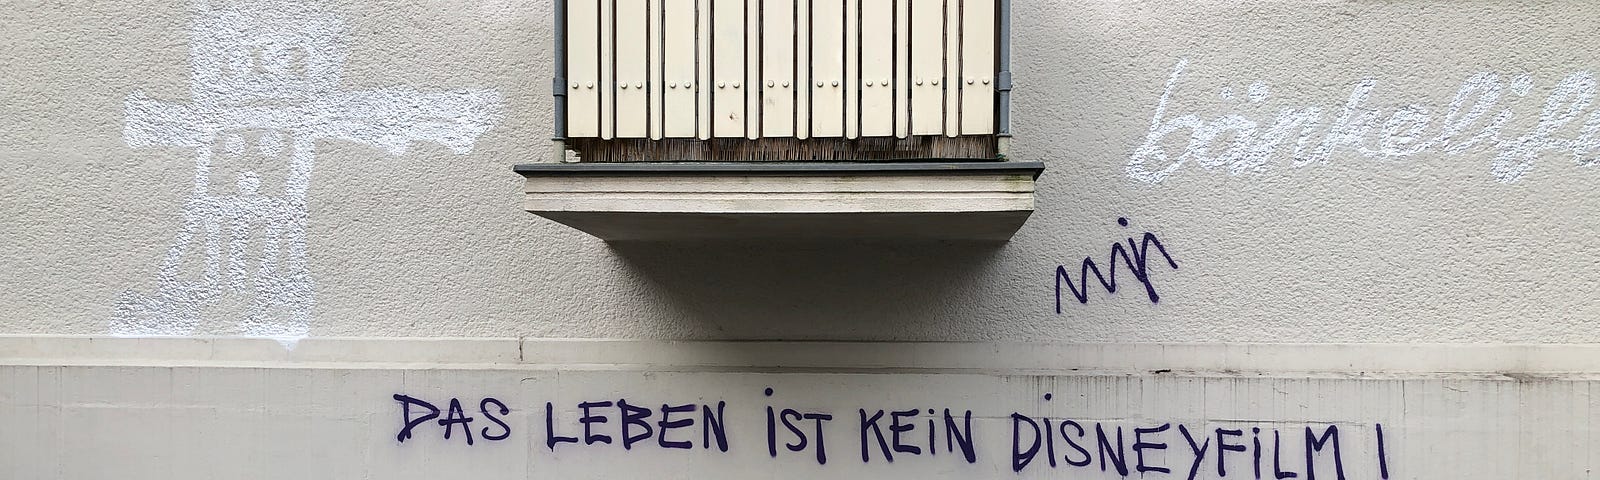 Photo of a beige balcony in Berlin with a beige wall covered in graffiti tags. The one right below the balcony in purple/blue  reads “Das Leben ist Kein Disneyfilm” or Life is not a Disney movie.